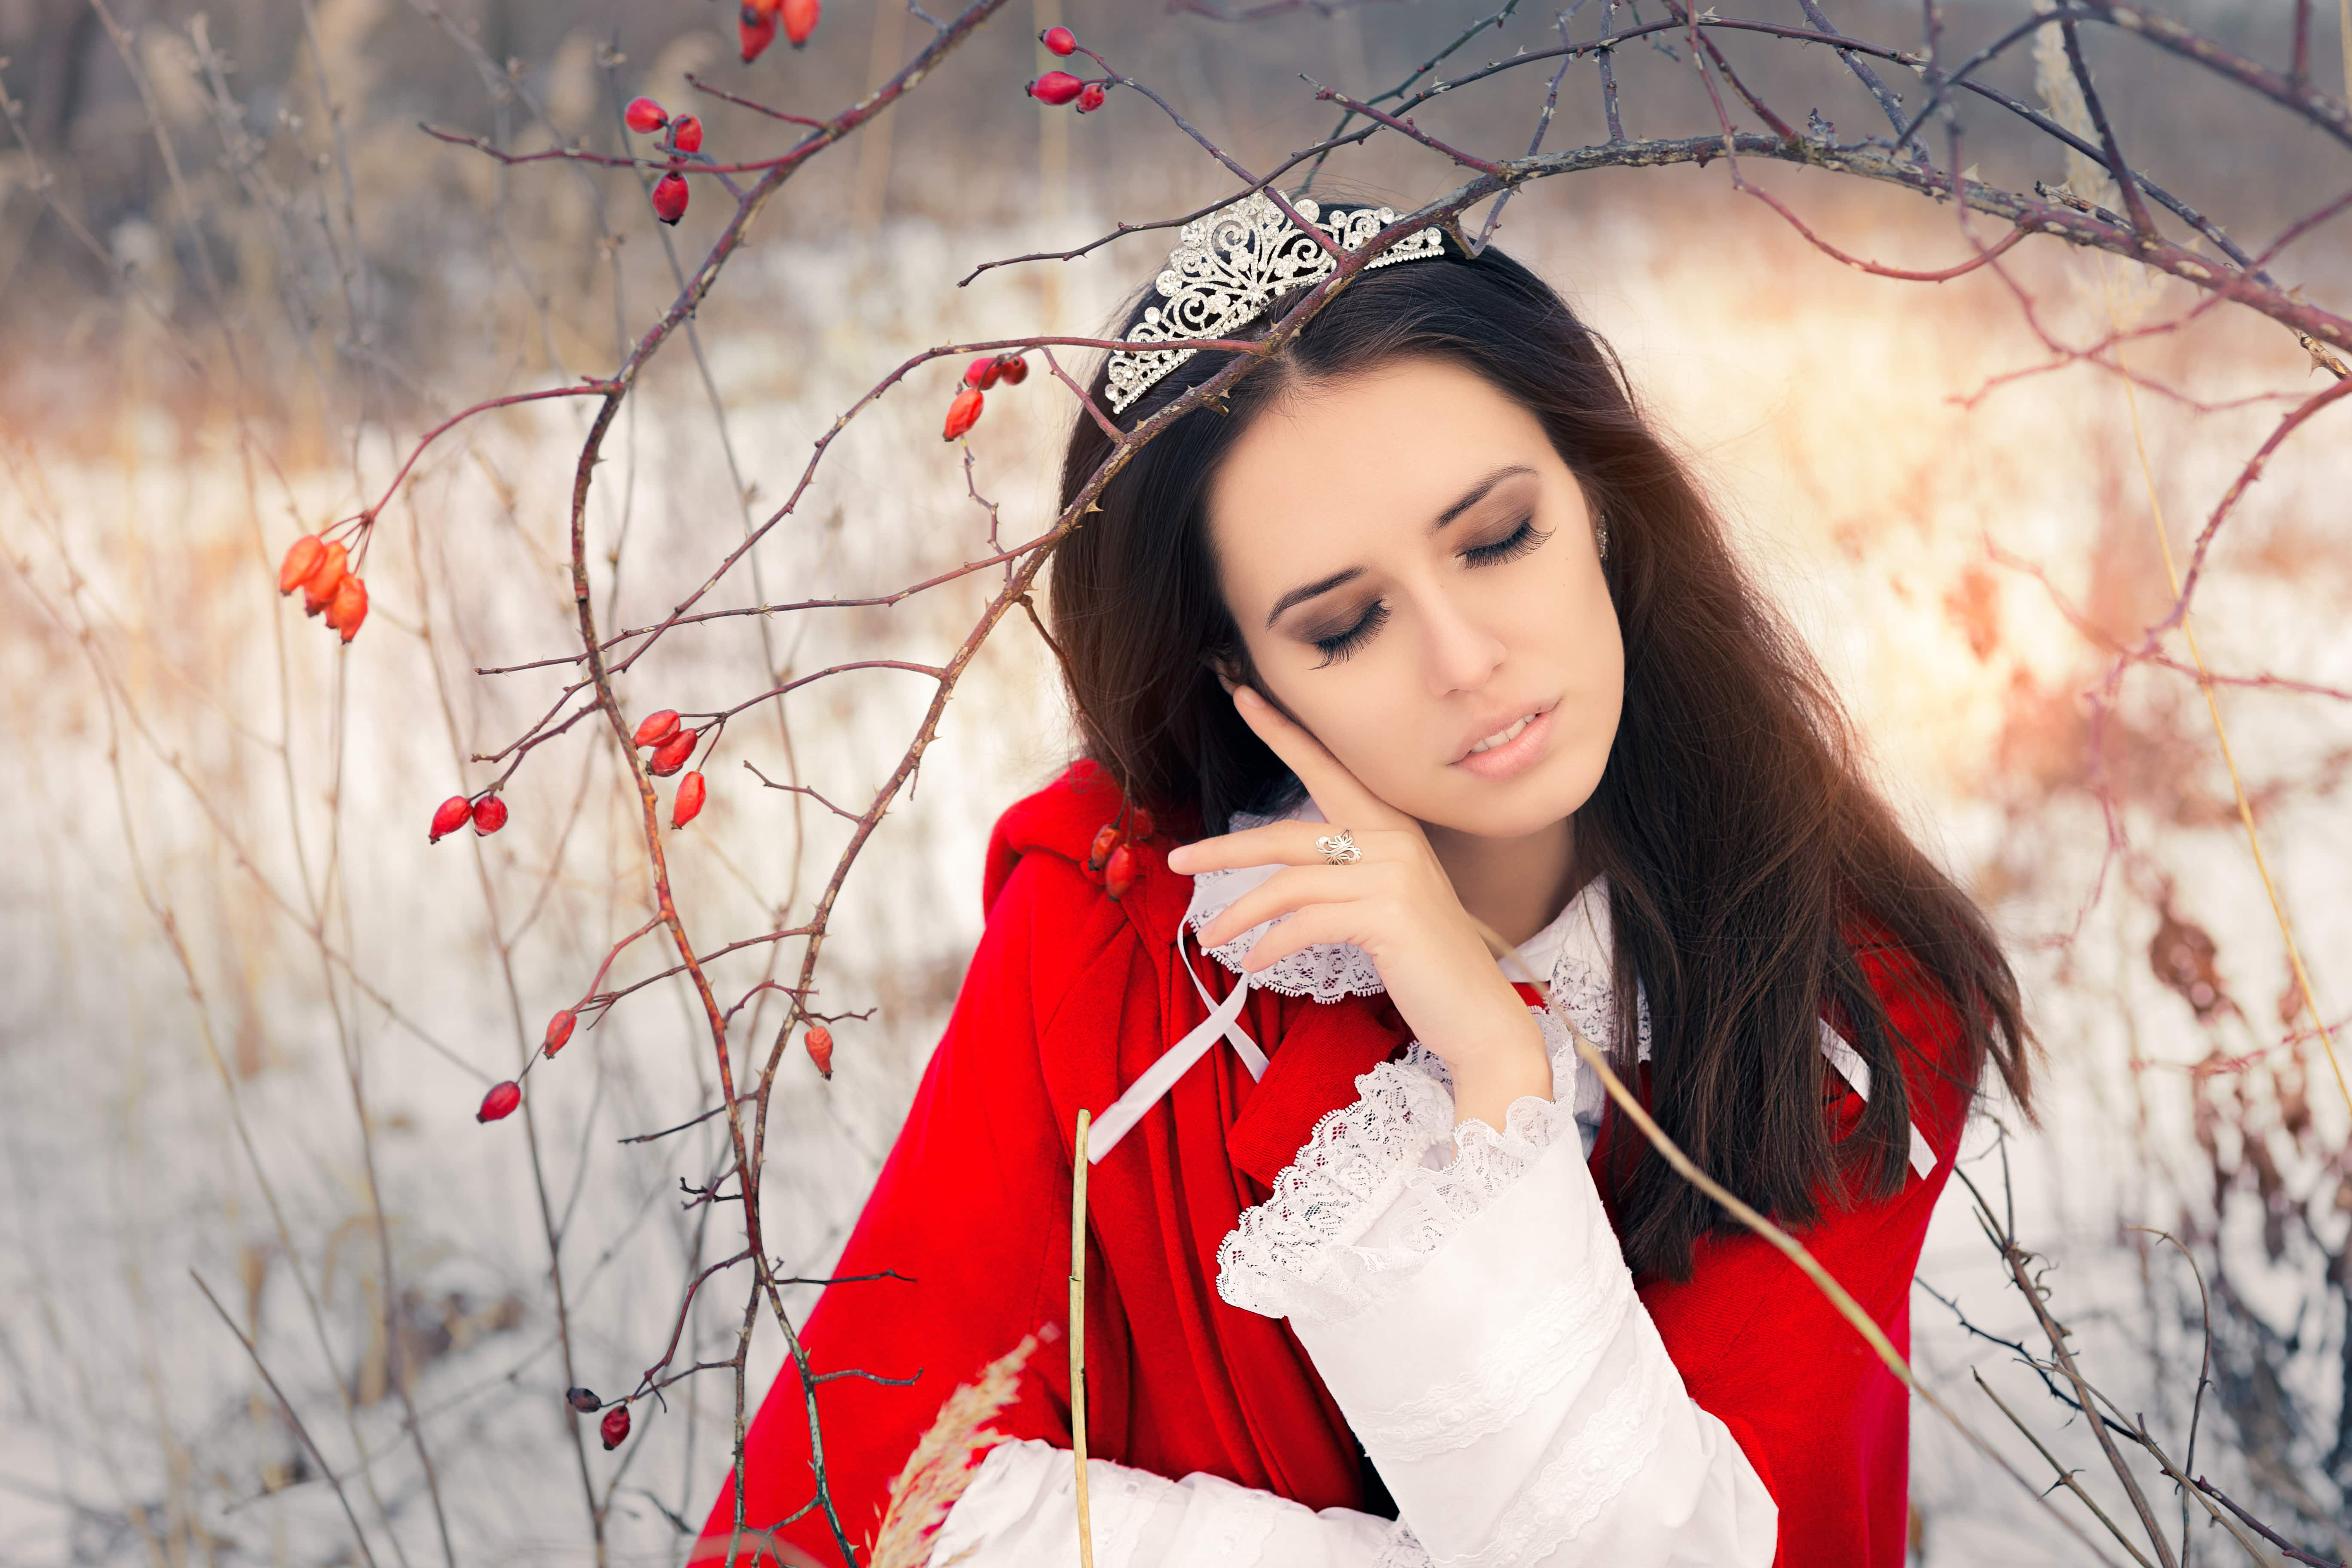 Winter Princess with Rosehip Branch - Portrait of a beautiful fairy tale queen